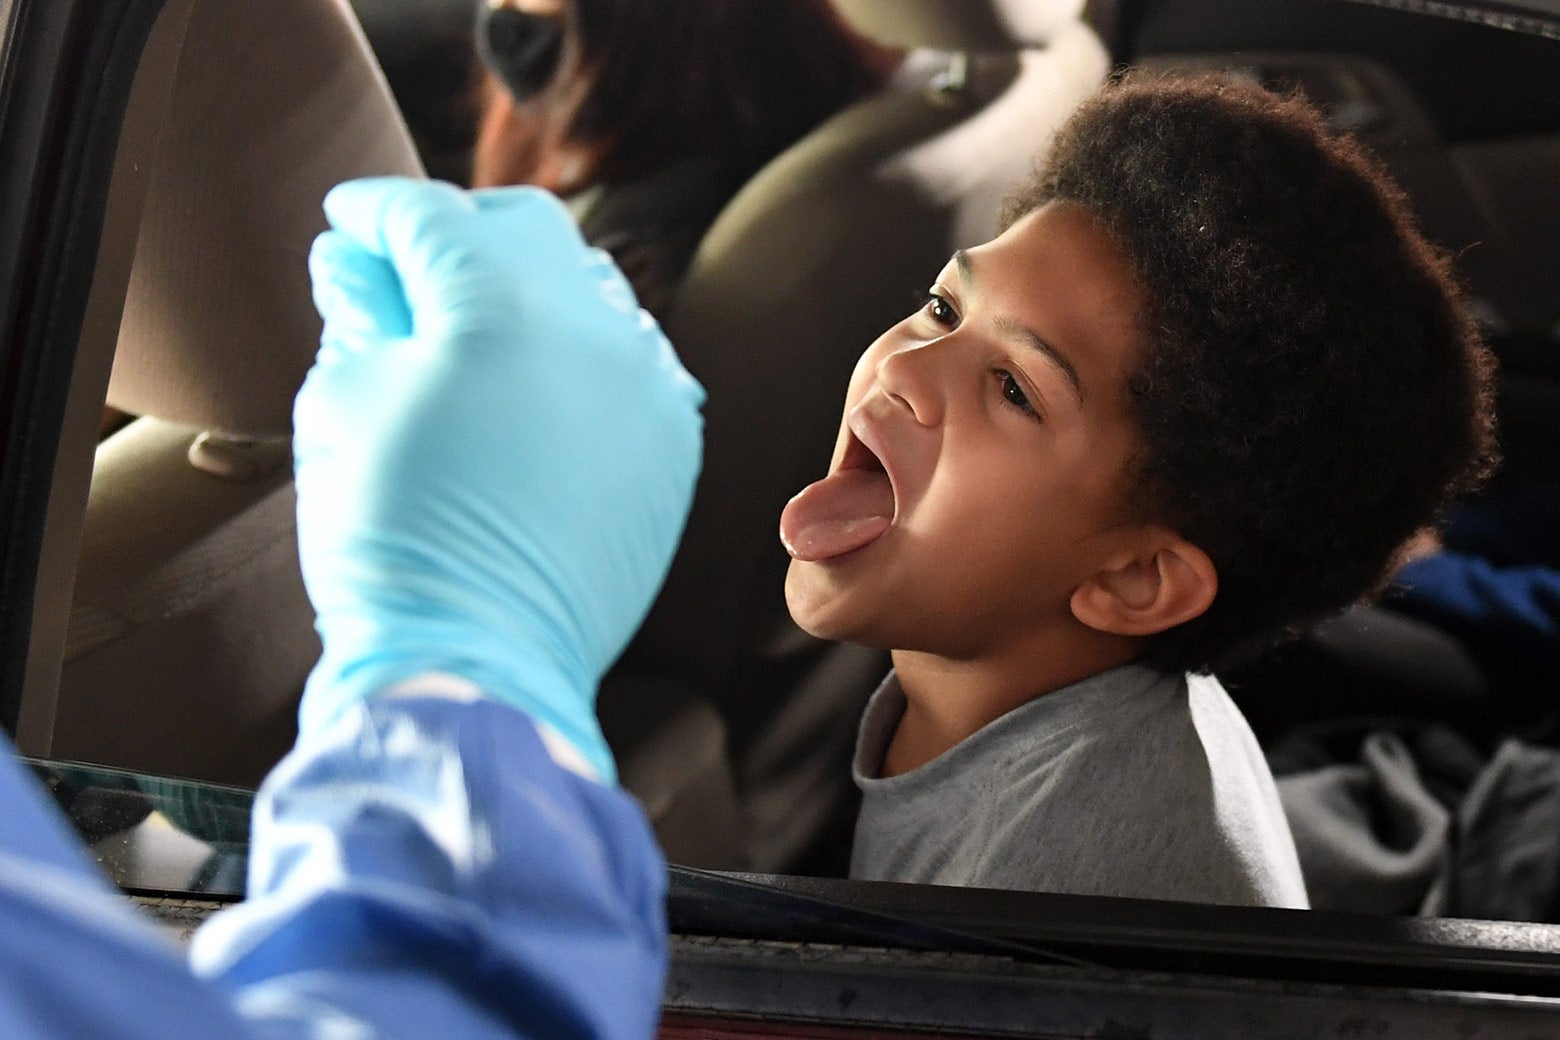 A boy sitting in the back seat of a car sticks out his tongue as a health care worker approaches.